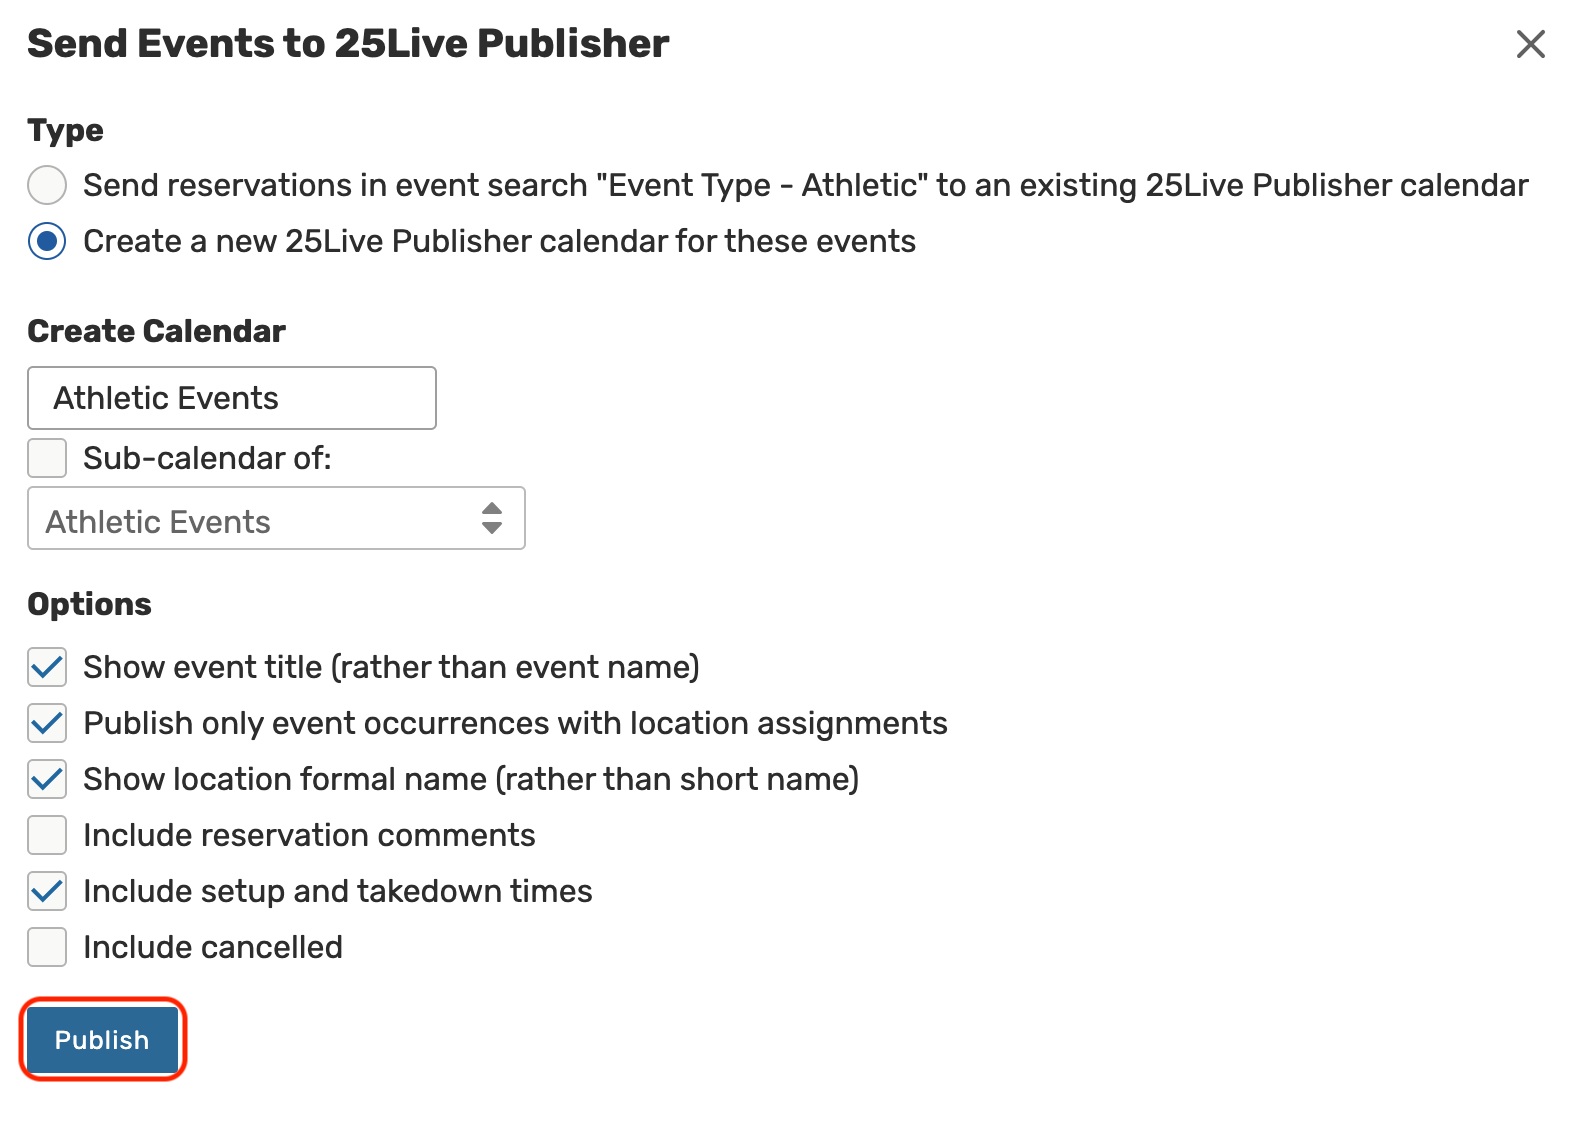 Publish button on the send events to 25live publisher configuration window